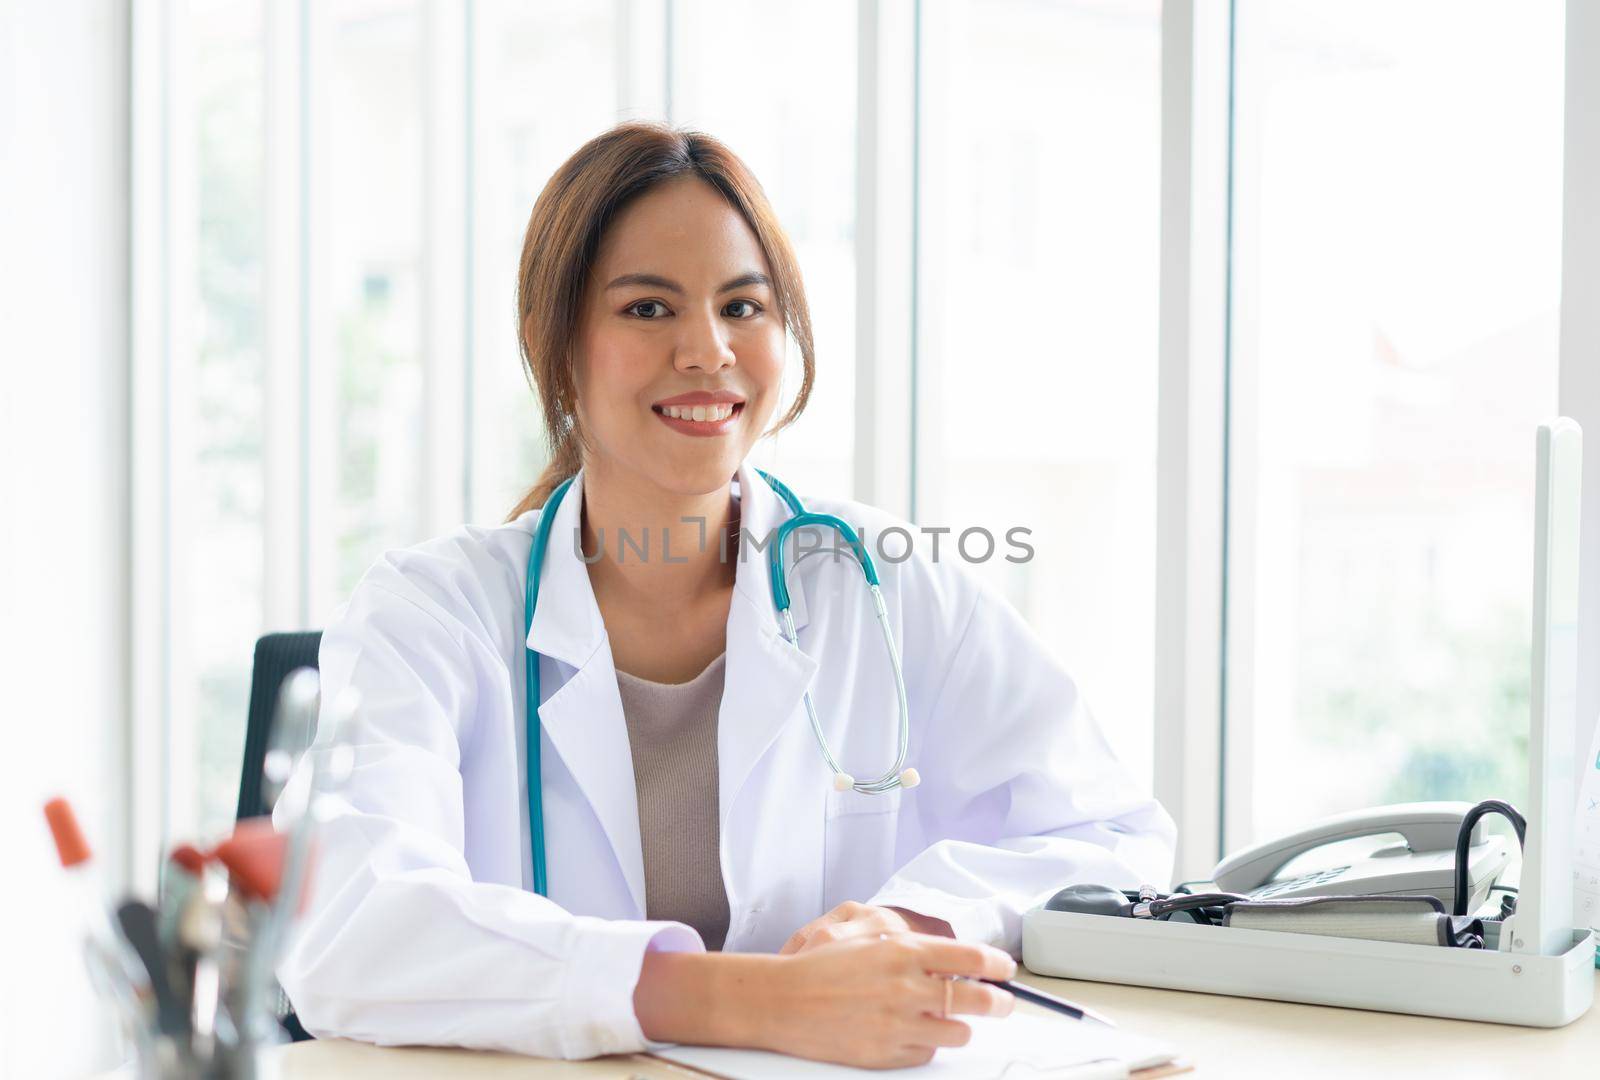 A female doctor works in an office at a hospital or clinic.  Smile and confident woman